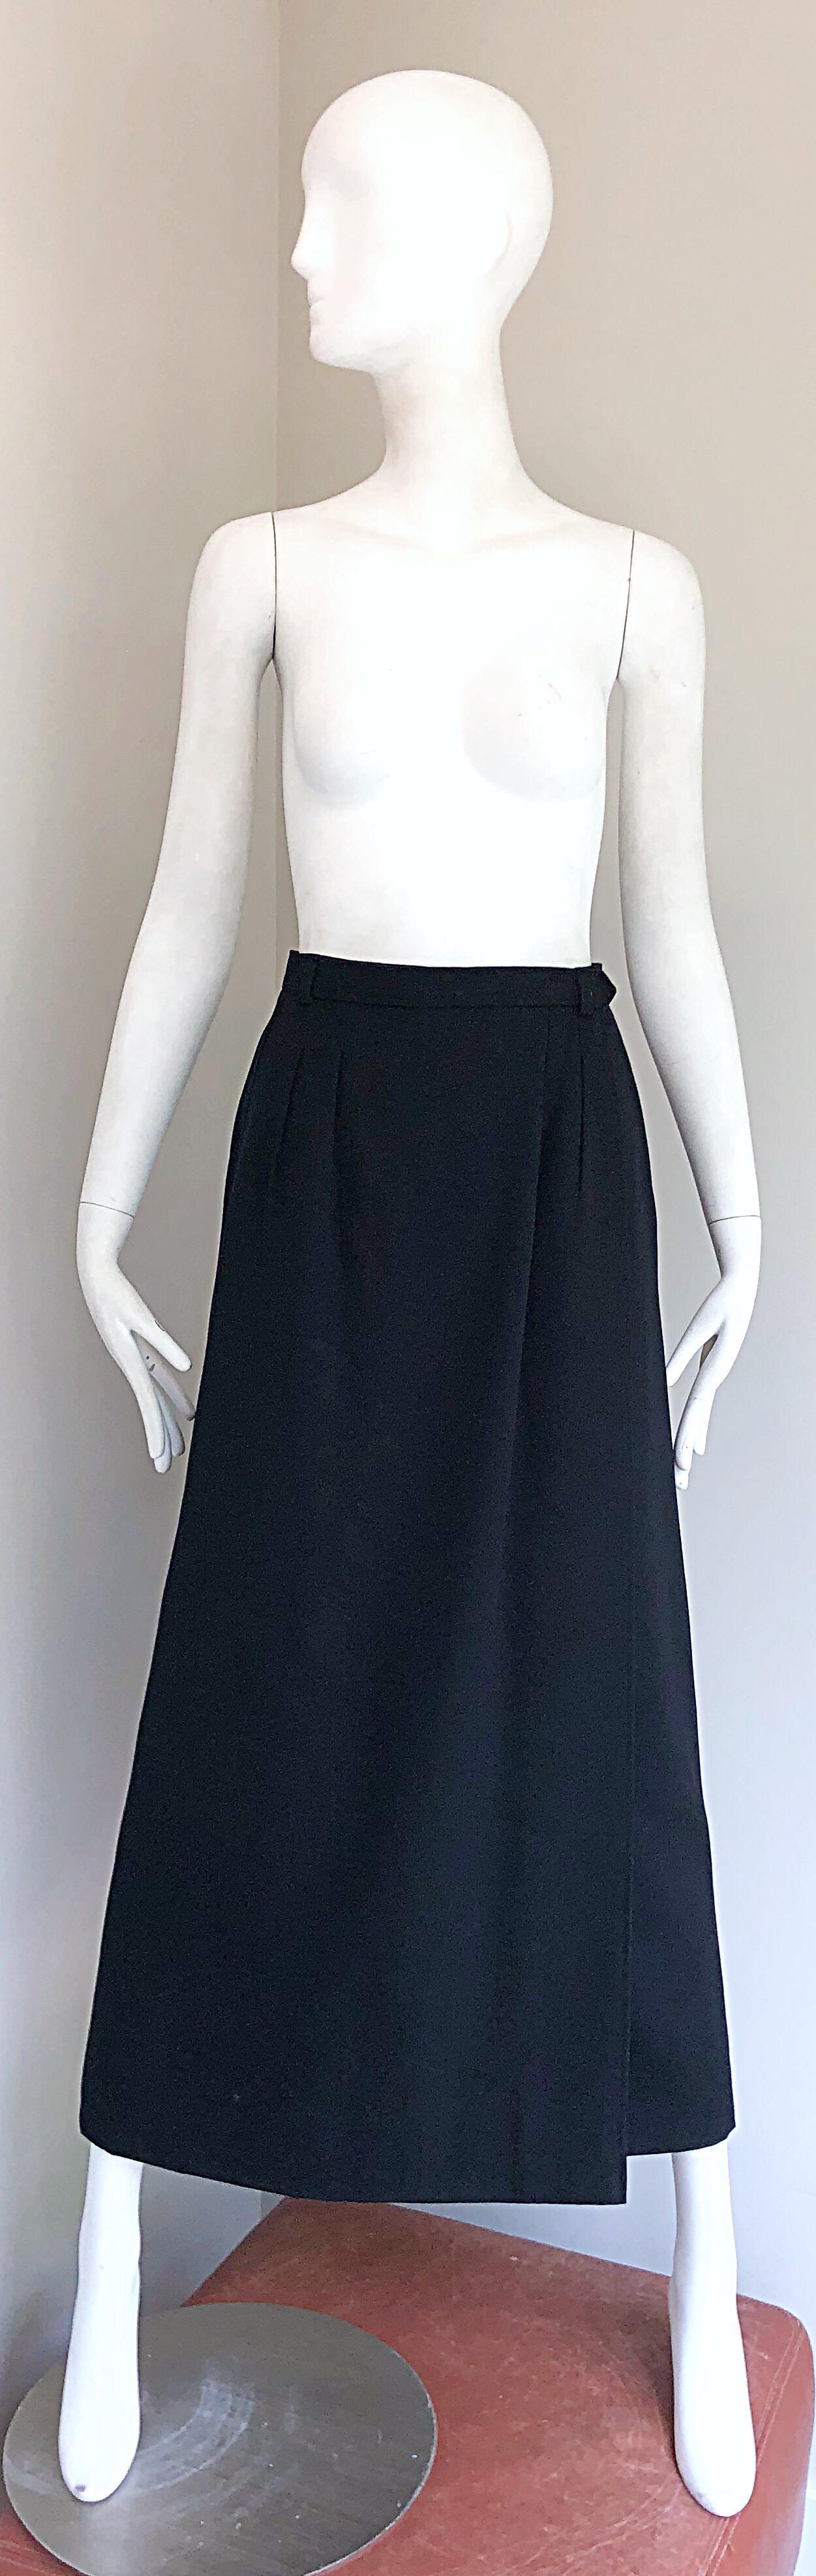 Chic, yet classic vintage late 70s YVES SAINT LAURENT Rive Gauche black wool wrap maxi skirt! Features an interior button with hook-and-eye closure. POCKETS at each side of the waist. Fully lined. Belt loops to accomodate your favorite belt.
A truly